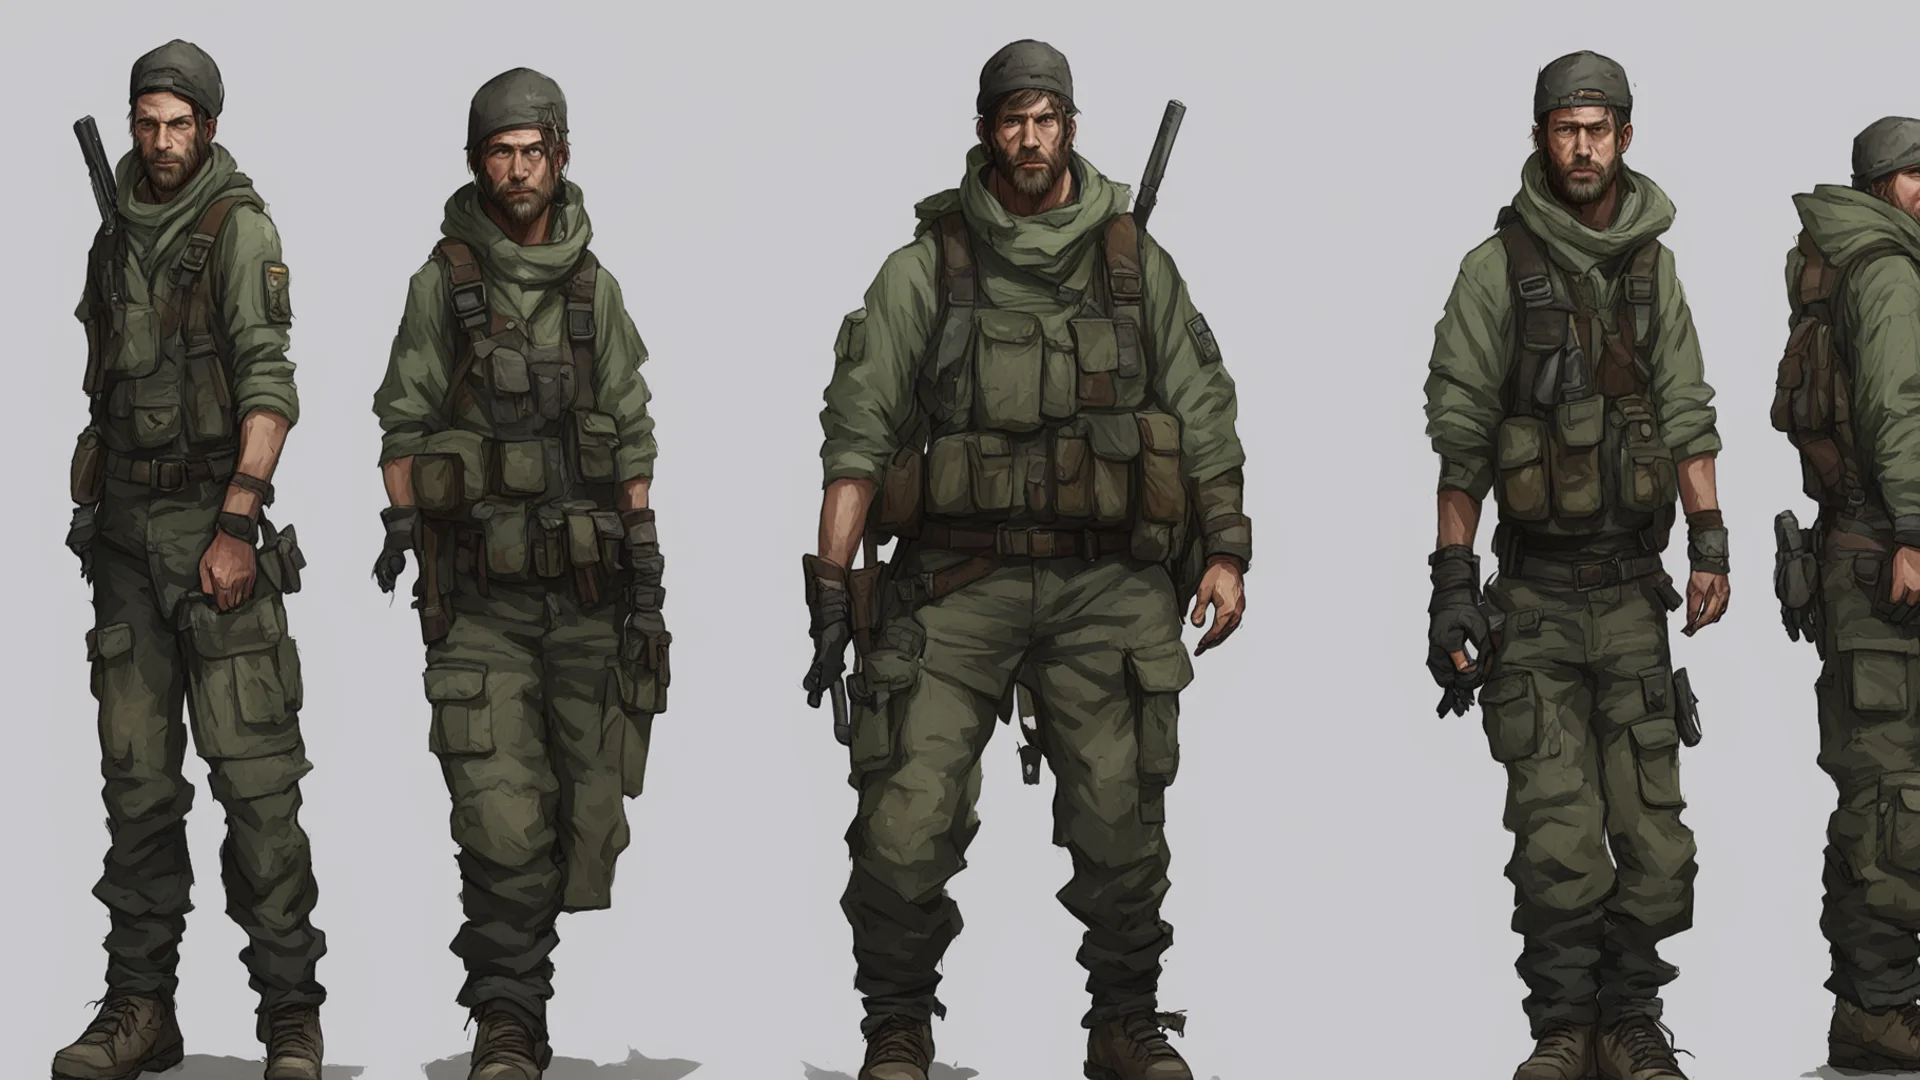 a game character concept art inspired by survival games like dayz  wide